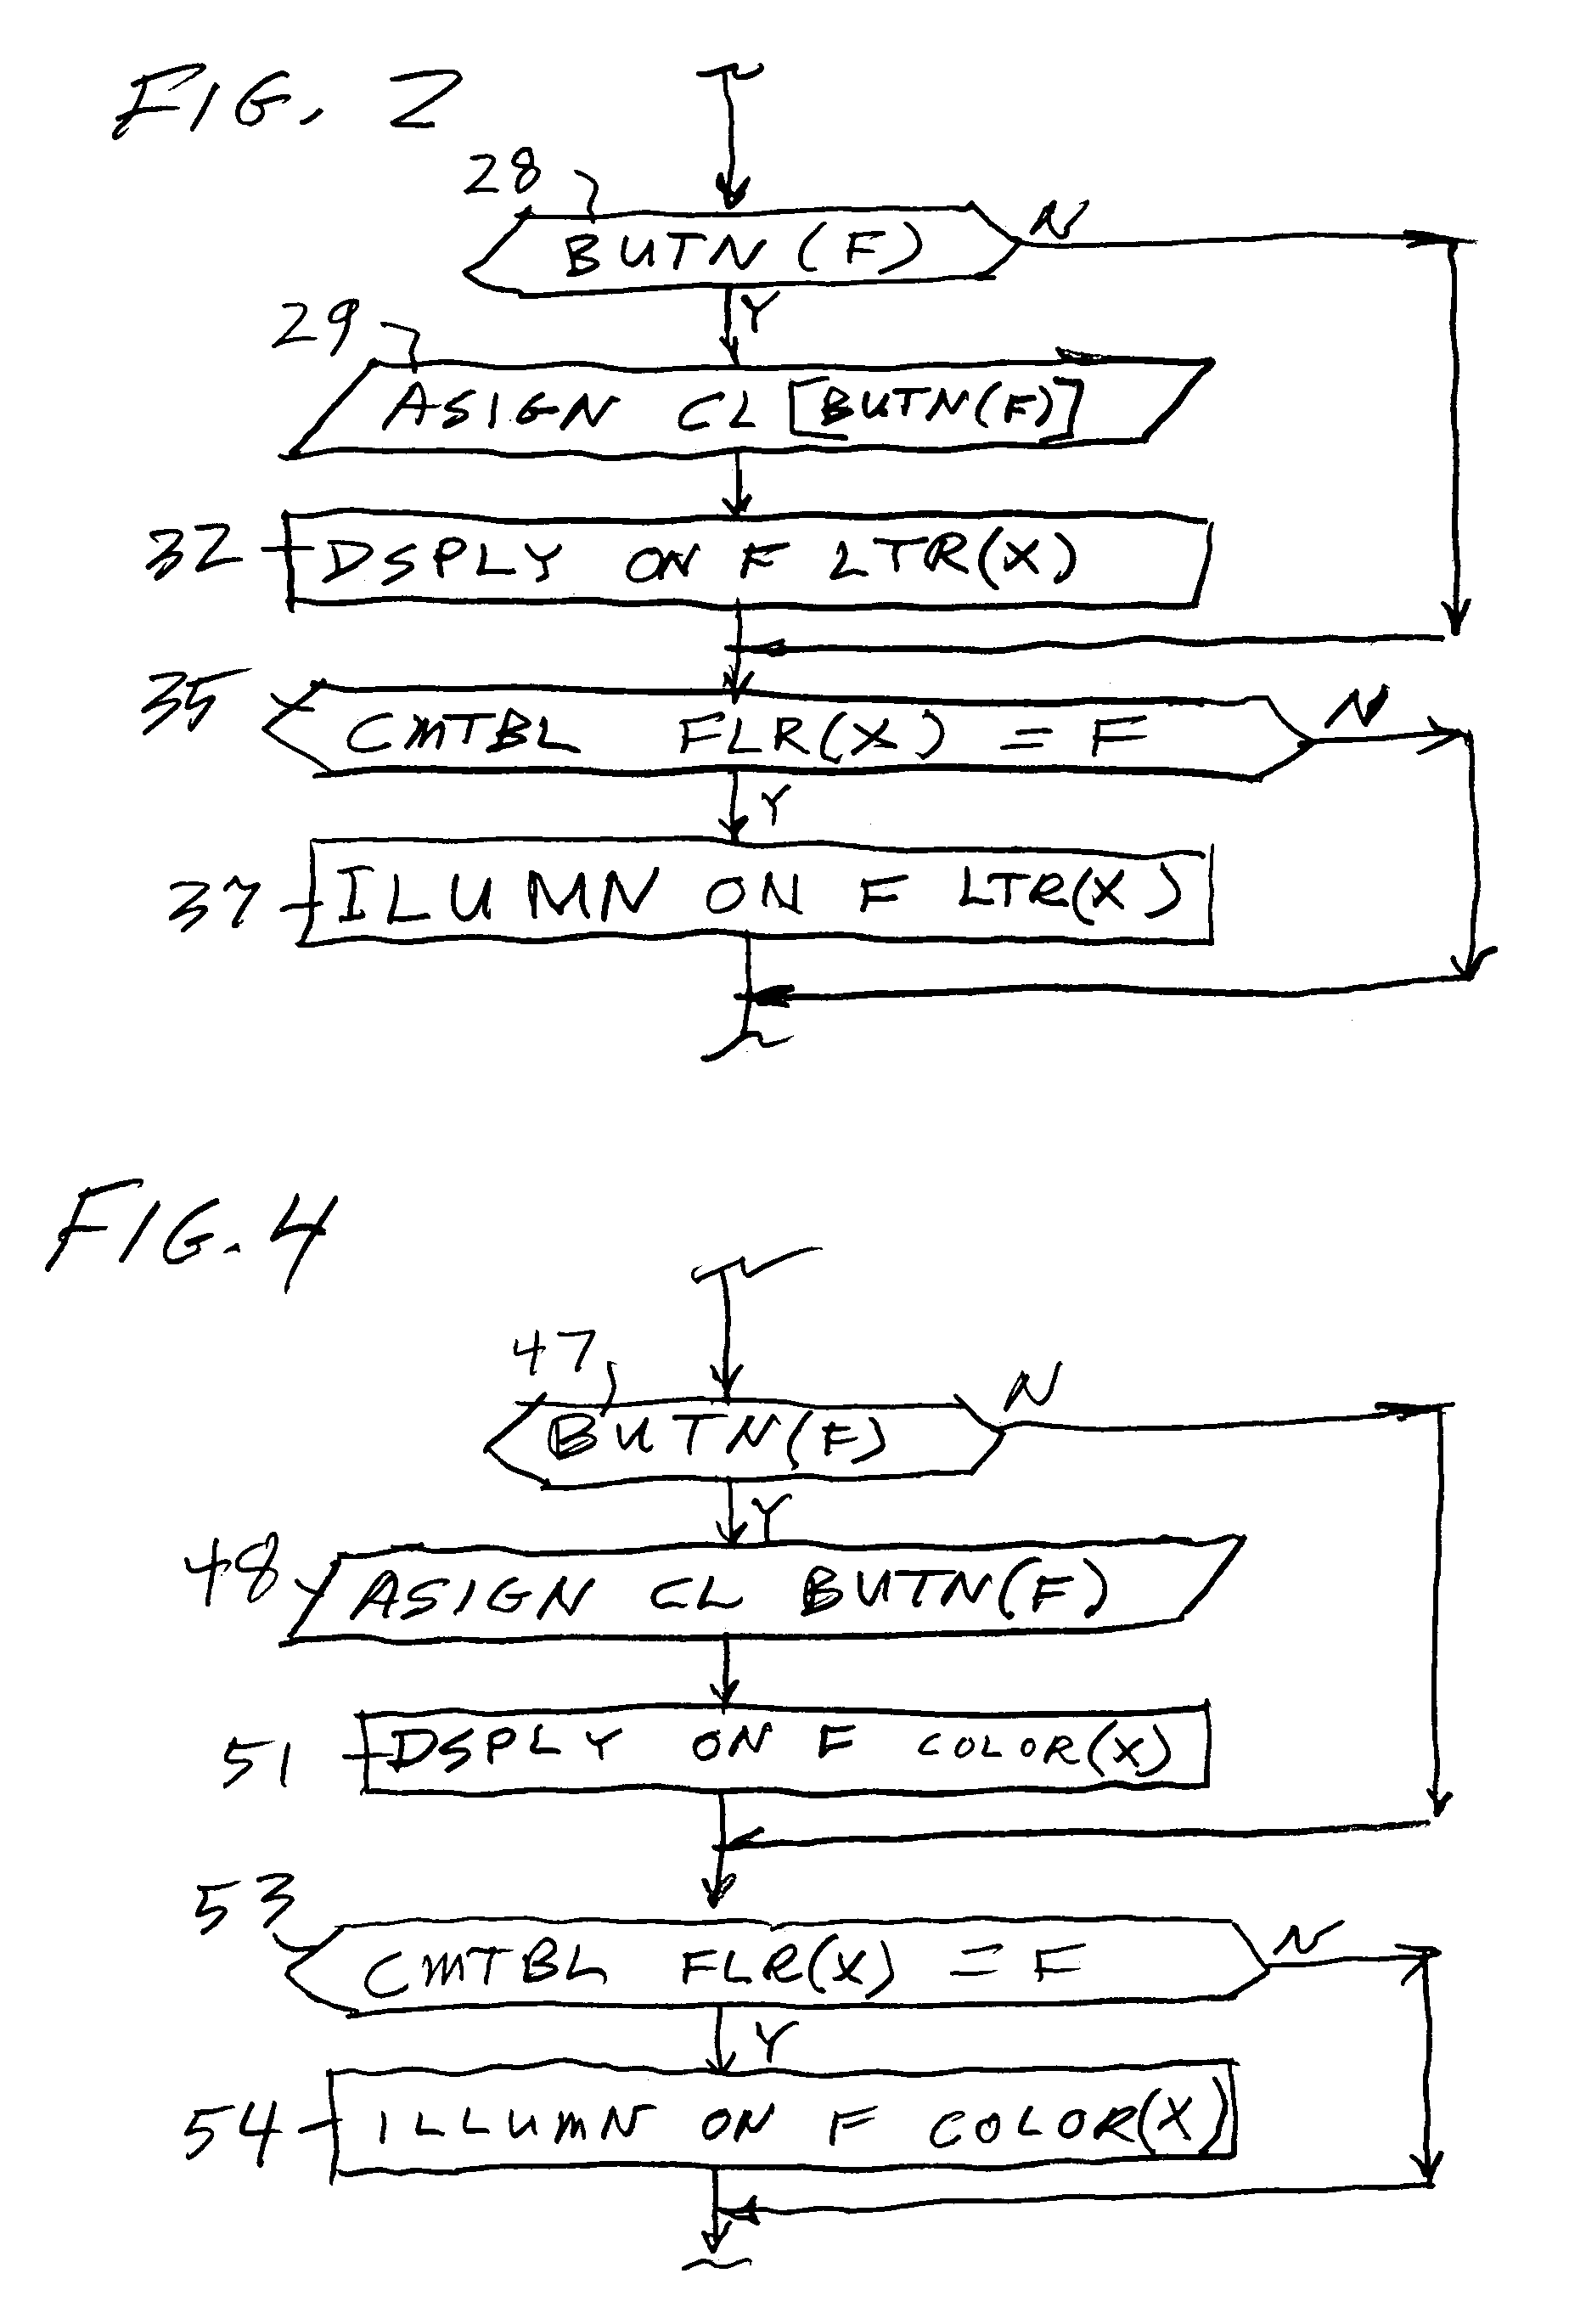 Elevator call assignment indications for multiple elevators in each of a plurality of elevator hoistways